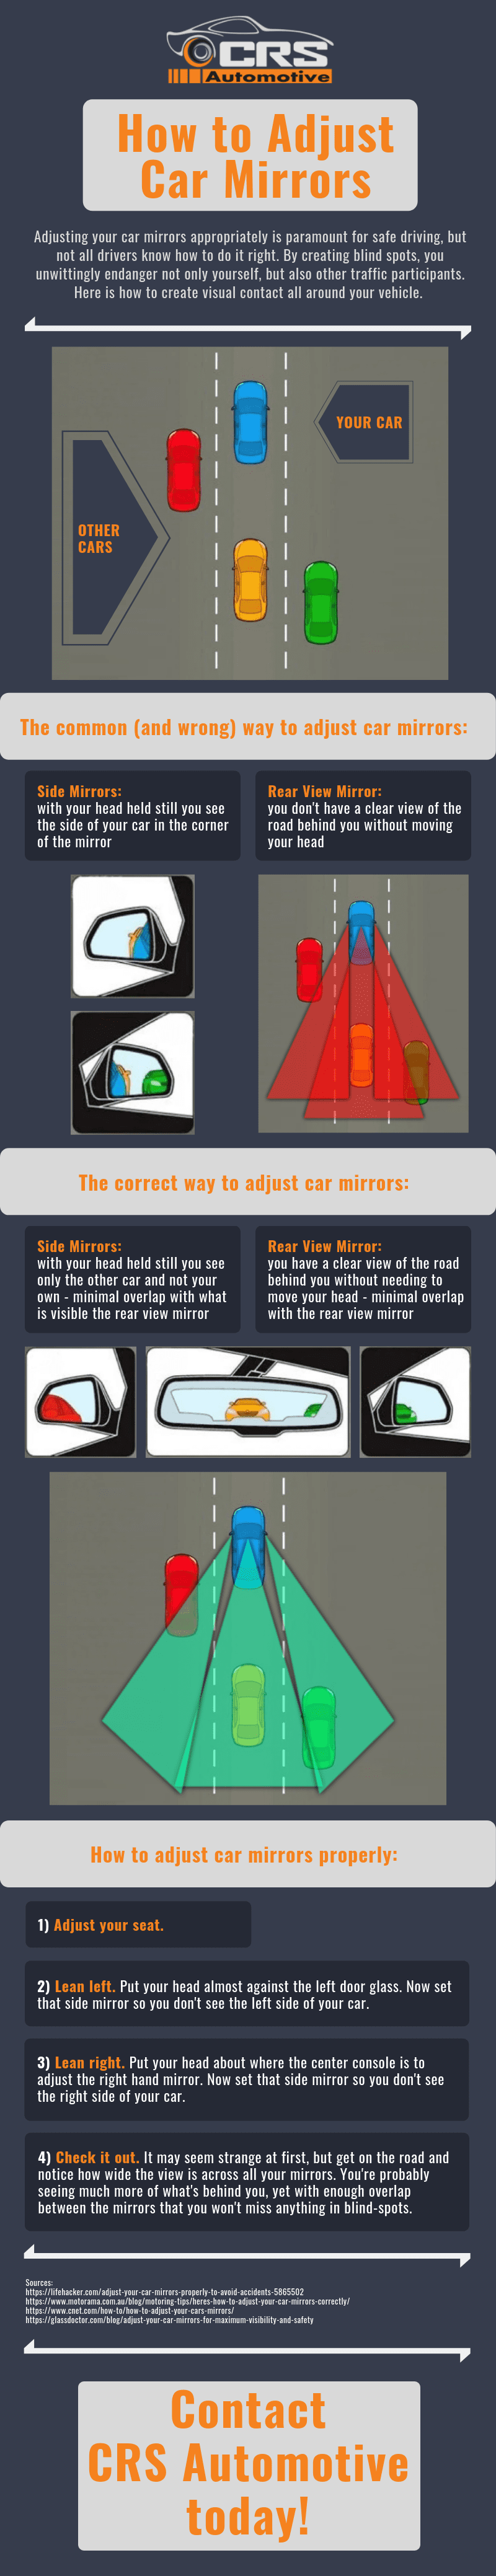 How to Adjust Car Mirrors Infographic